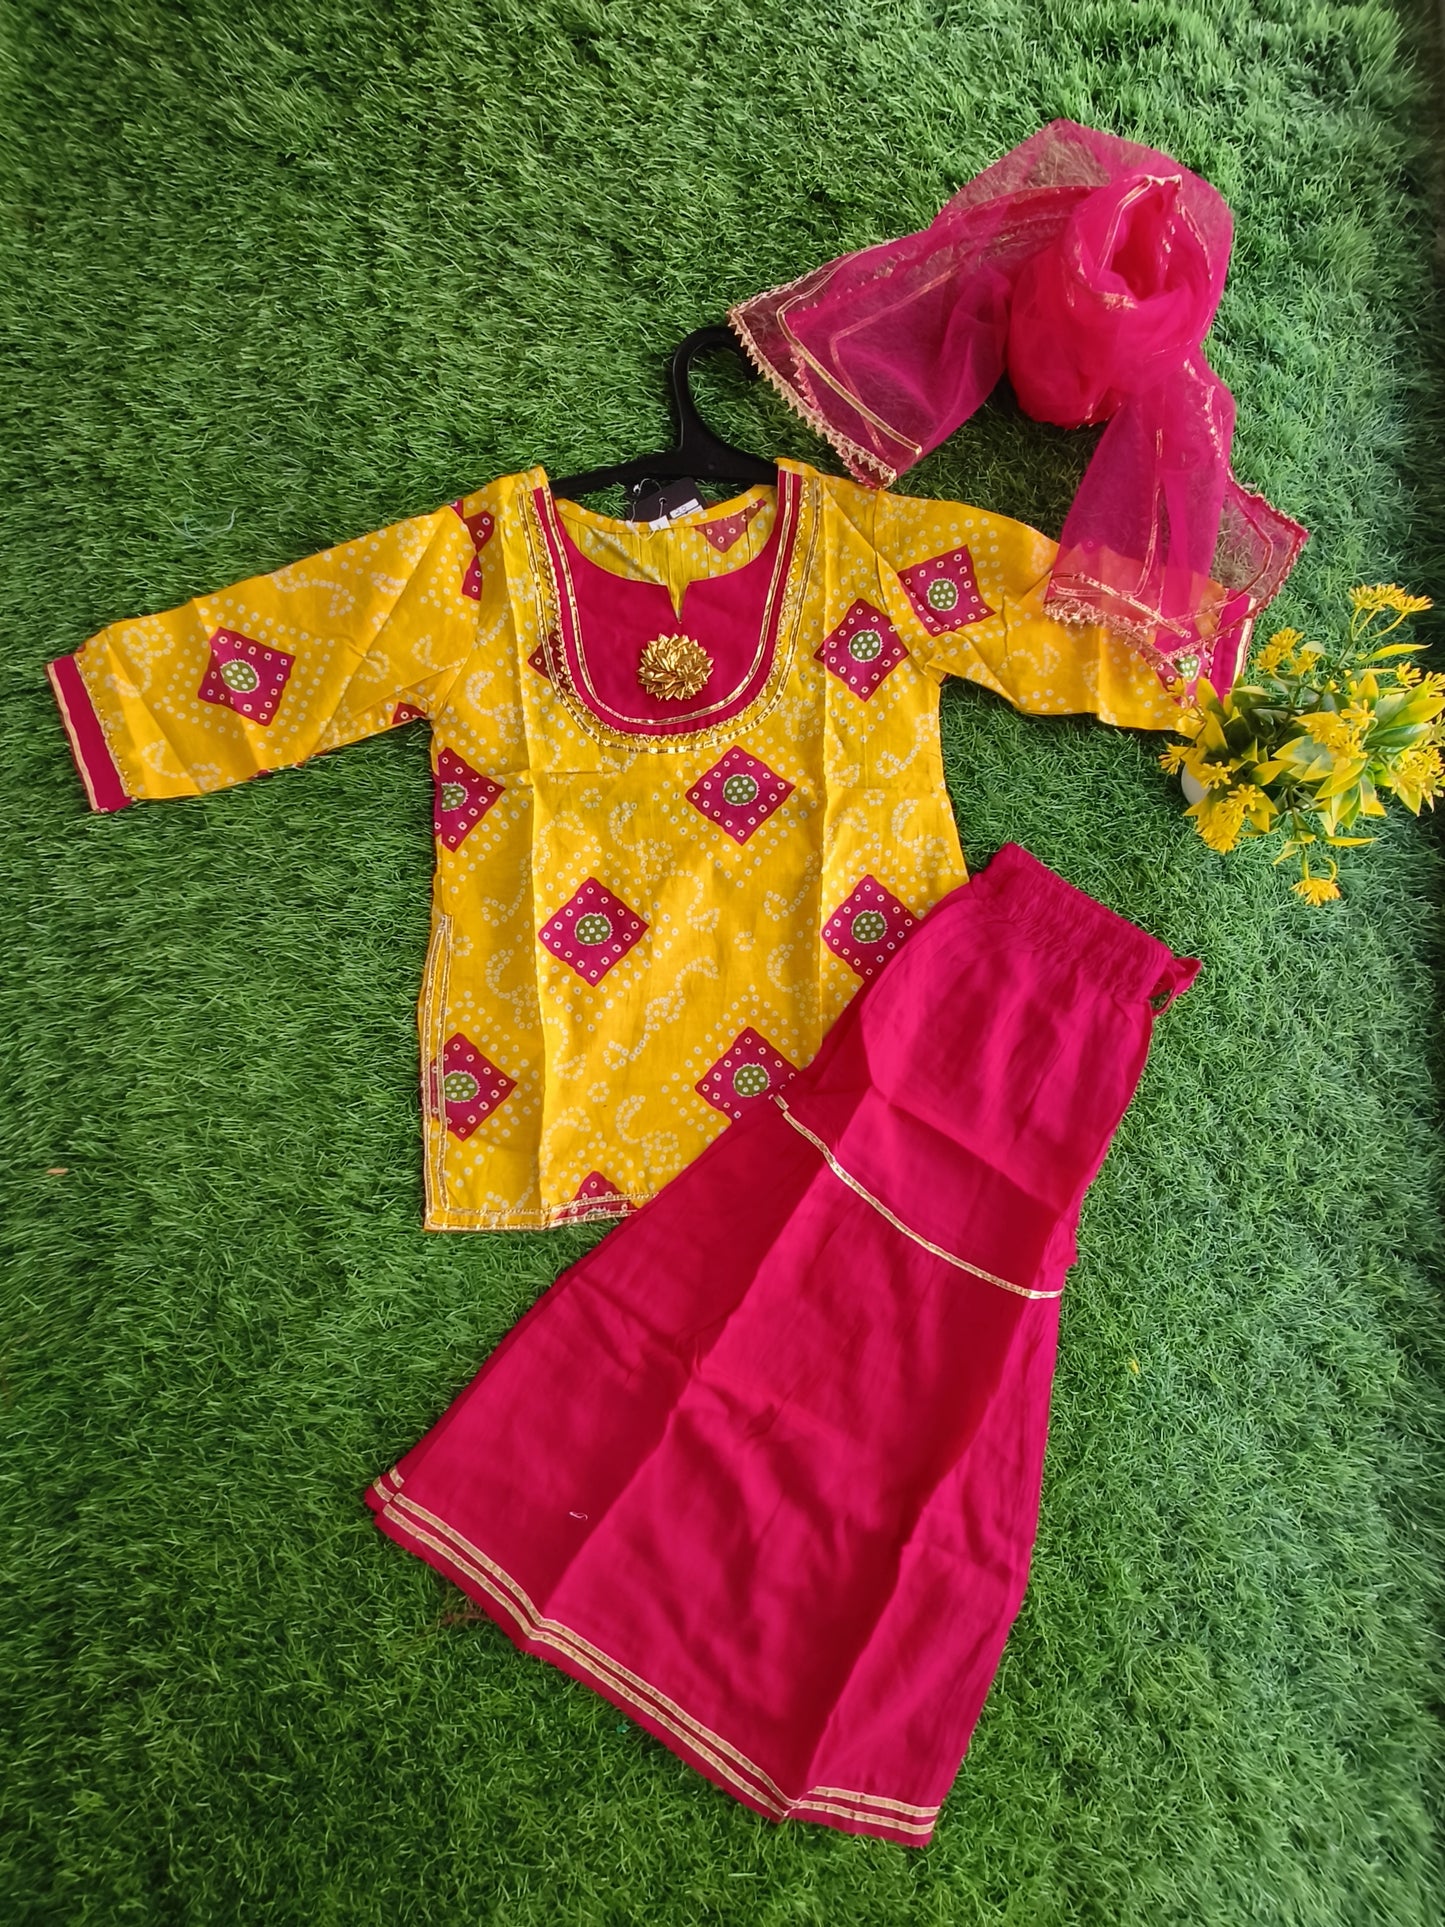 Athletic Tradition-Pink Printed Cotton Sharara Outfit Set with Dupatta for Girl